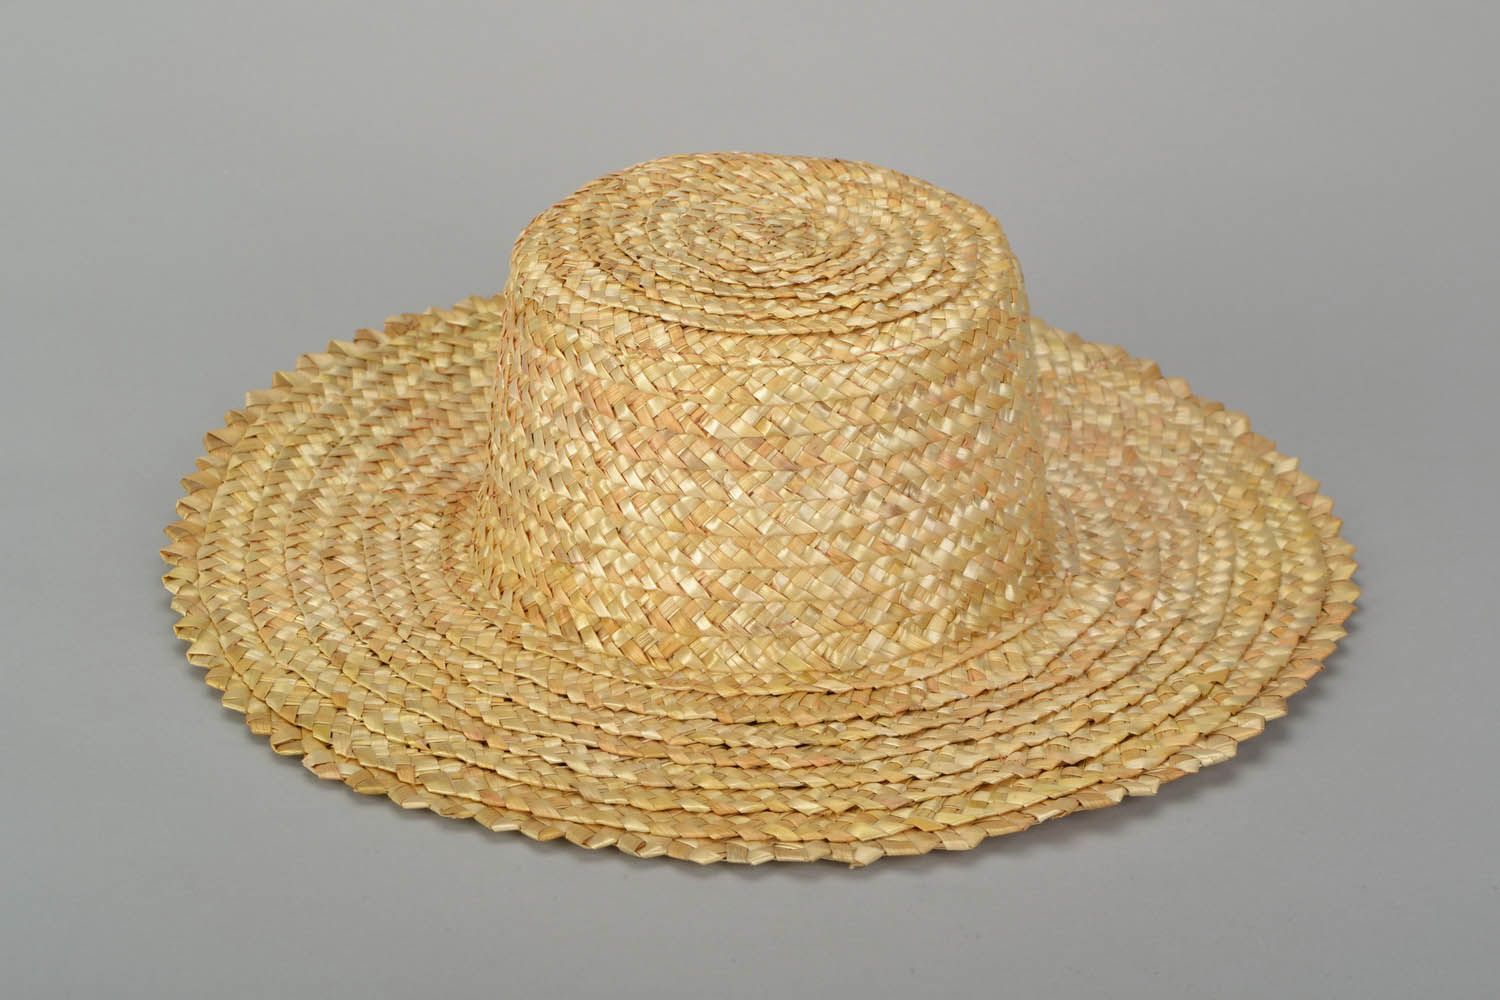 Straw hat for men picture 3. Straw hat for men photo 3. 